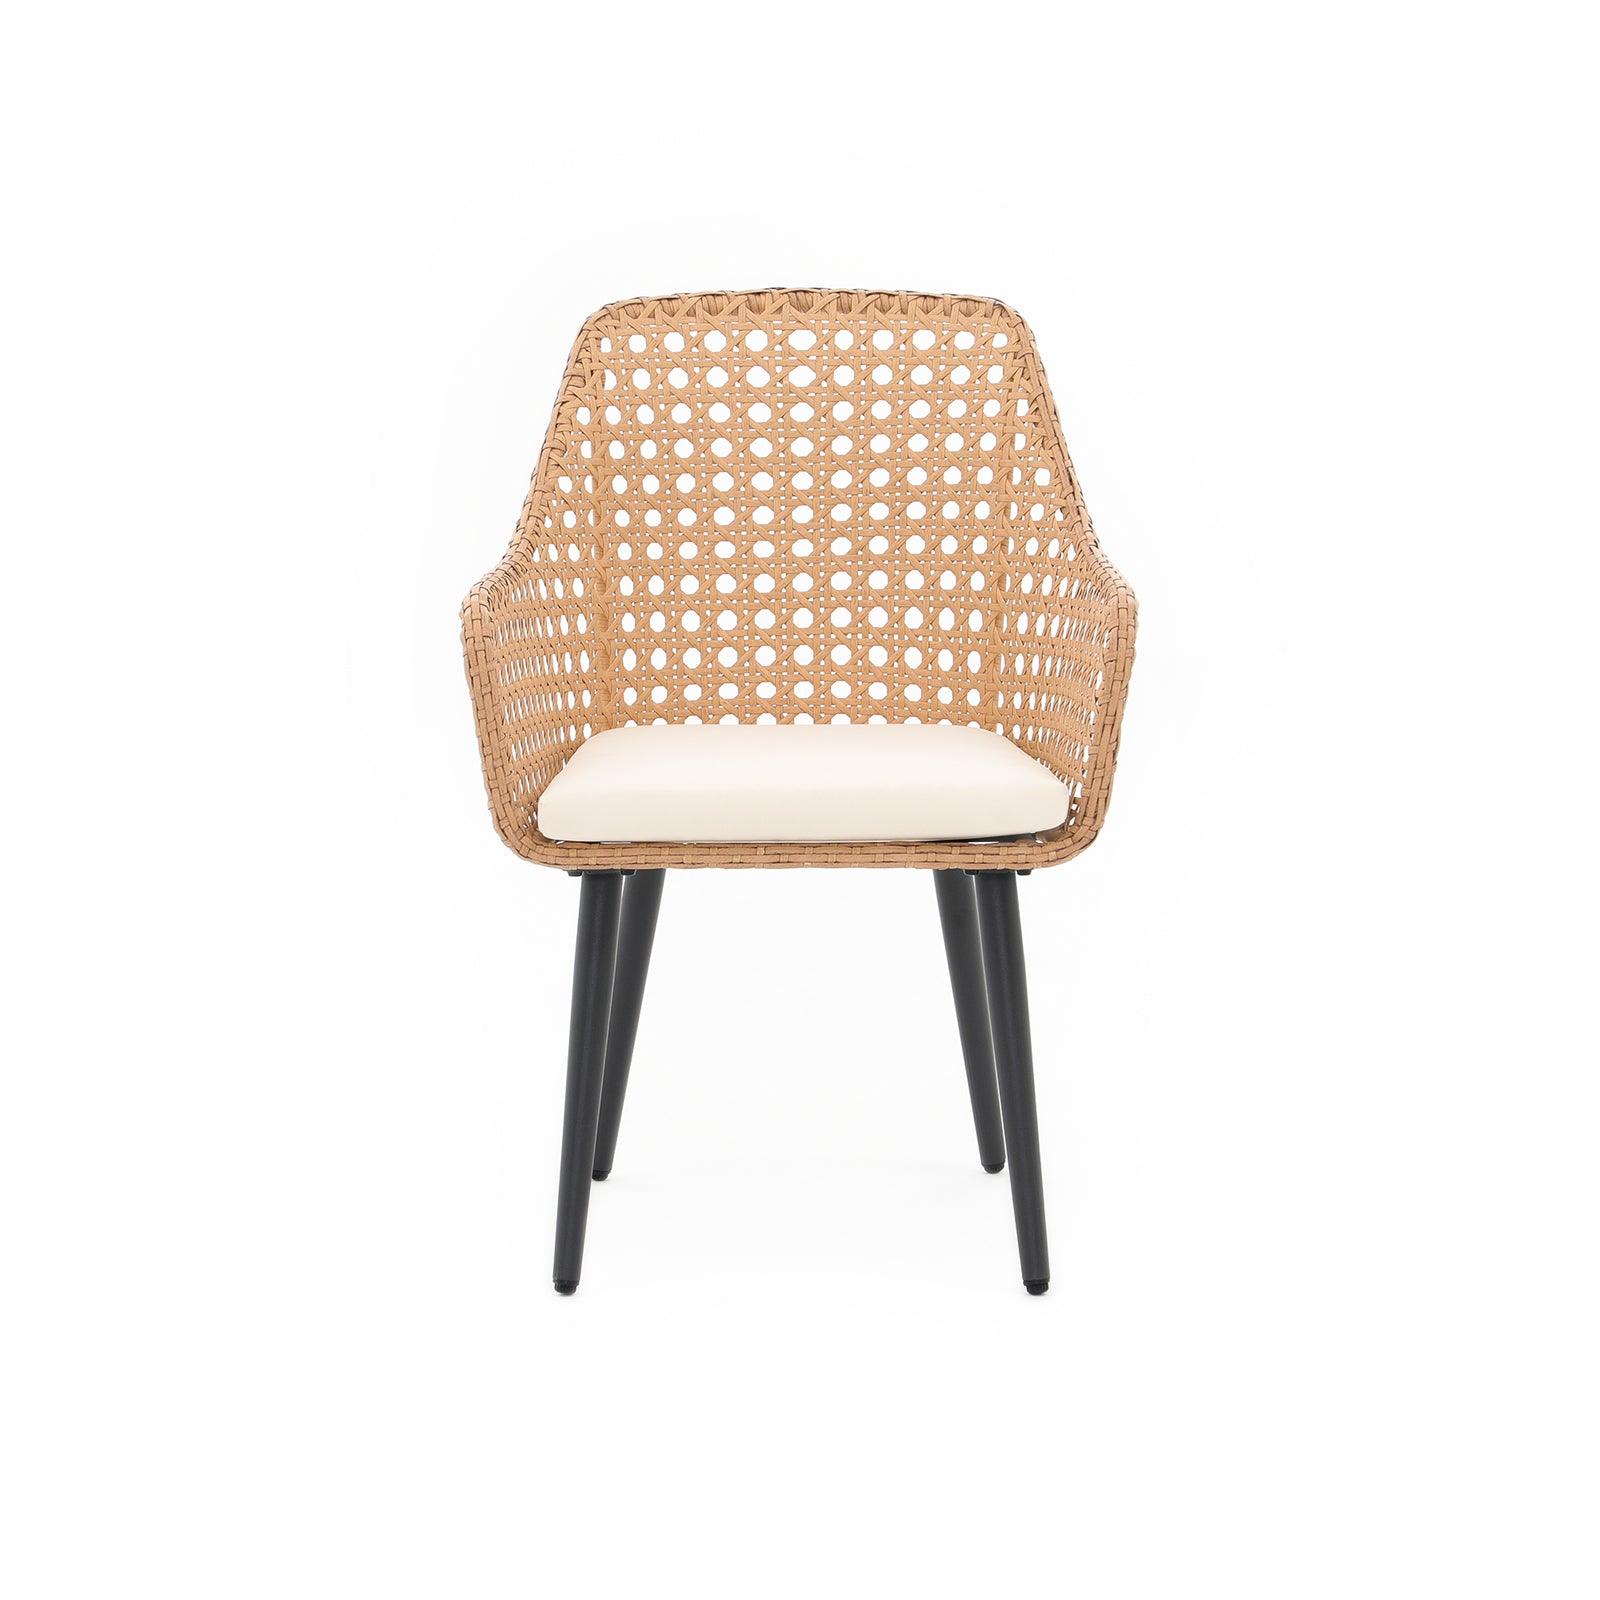 Menorca Modern Wicker Outdoor Dining Chair, Yellow Rattan, Steel Frame, White Cushions, Front View- Jardina Furniture